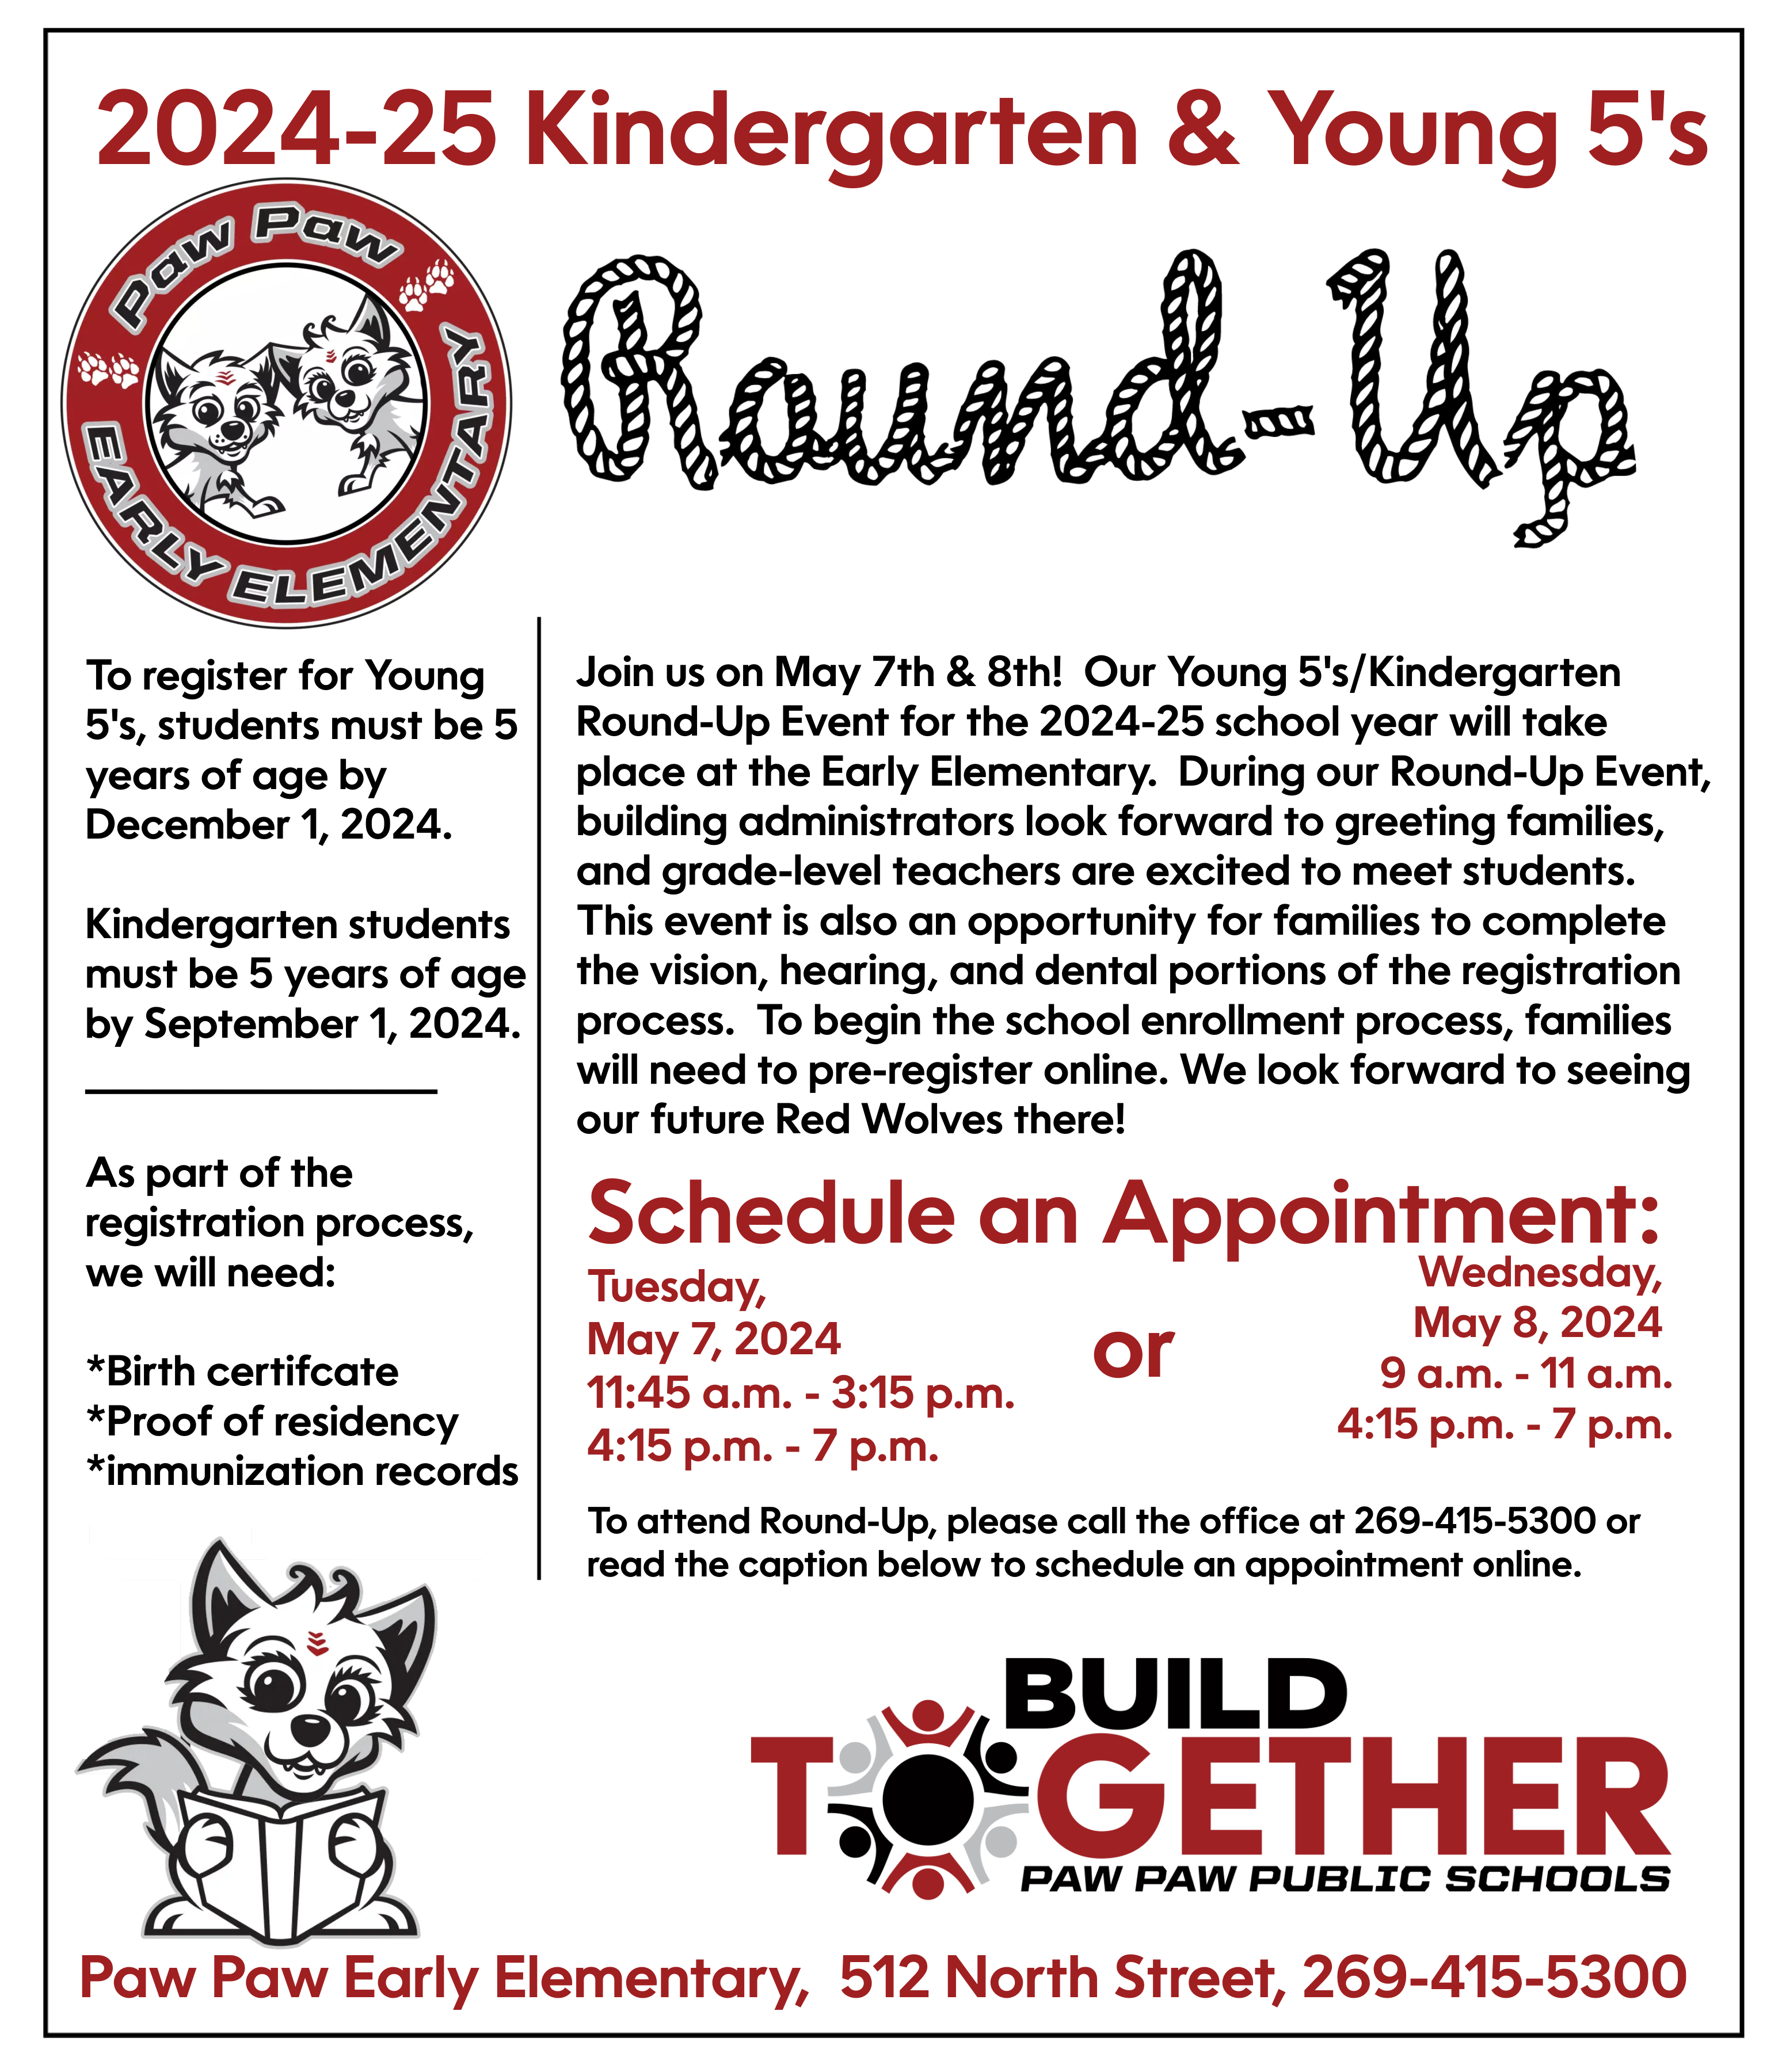 2024-25 Kindergarten & Young 5's Round Up. Paw Paw Early Elementary. To register for Young 5's, students must be 5 years of age by December 1, 2024.  Kindergarten students must be 5 years of age by September 1, 2024. _________________  As part of the  registration process, we will need:  *Birth certifcate *Proof of residency *immunization records. oin us on May 7th & 8th!  Our Young 5's/Kindergarten Round-Up Event for the 2024-25 school year will take place at the Early Elementary.  During our Round-Up Event, building administrators look forward to greeting families, and grade-level teachers are excited to meet students.  This event is also an opportunity for families to complete the vision, hearing, and dental portions of the registration process.  To begin the school enrollment process, families will need to pre-register online. We look forward to seeing our future Red Wolves there! Schedule an appt. on May 7 from 11:45 a.m. to 3:15 pm, or 4:15 p.m. to 7 p.m. , or on May 8 from 9 a.m. to 11 a.m. or 4:15 to 7 p.m. To attend Round-UP, please call the office at 269-415-5300 or read the caption below to schedule an appt. online. Build together. Paw Paw Early Elem. 512 North St. , 269-415-5300. wolf pup clip art